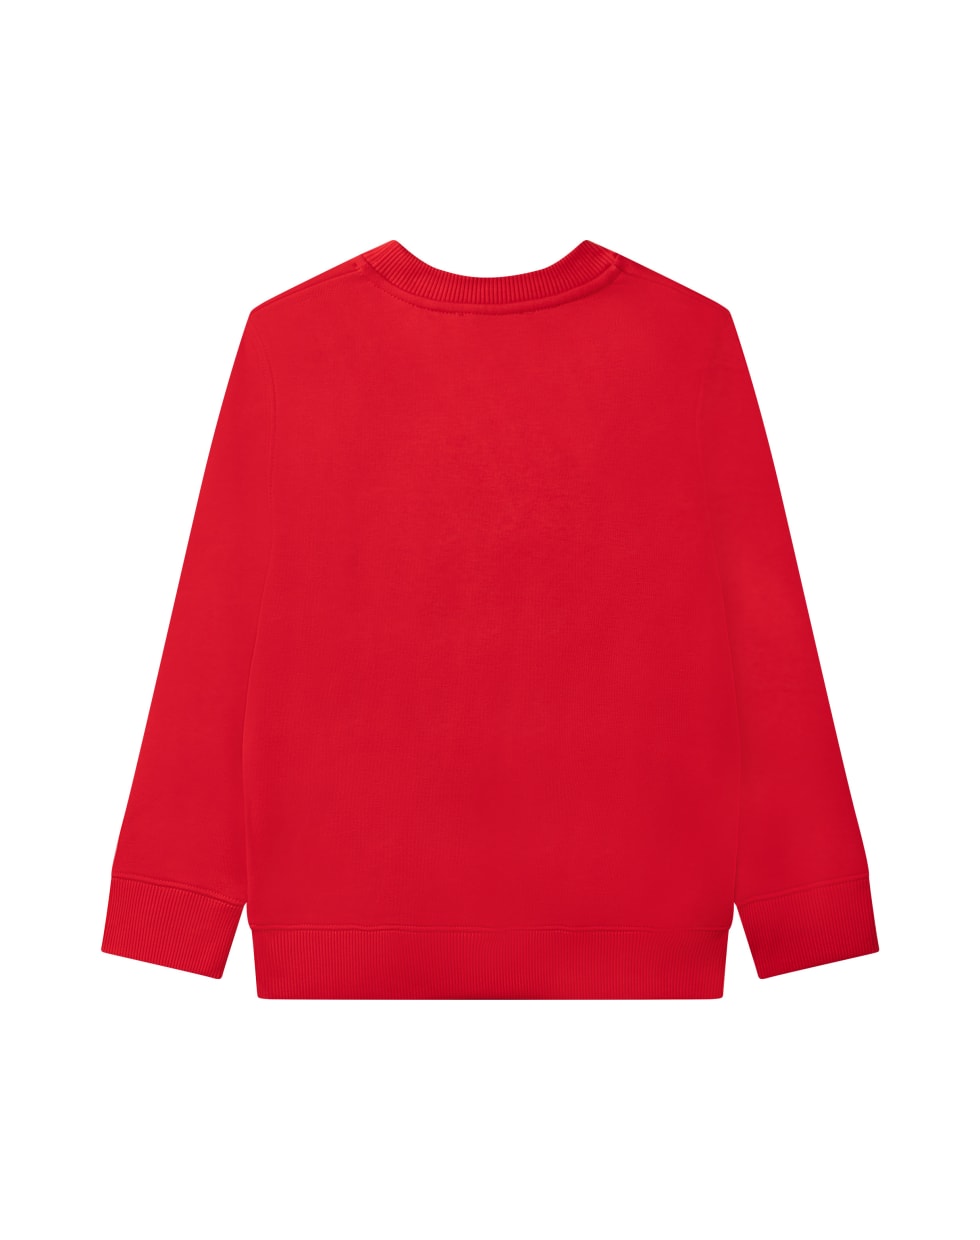 Givenchy Sweatshirt With Print - Rosso Vivo